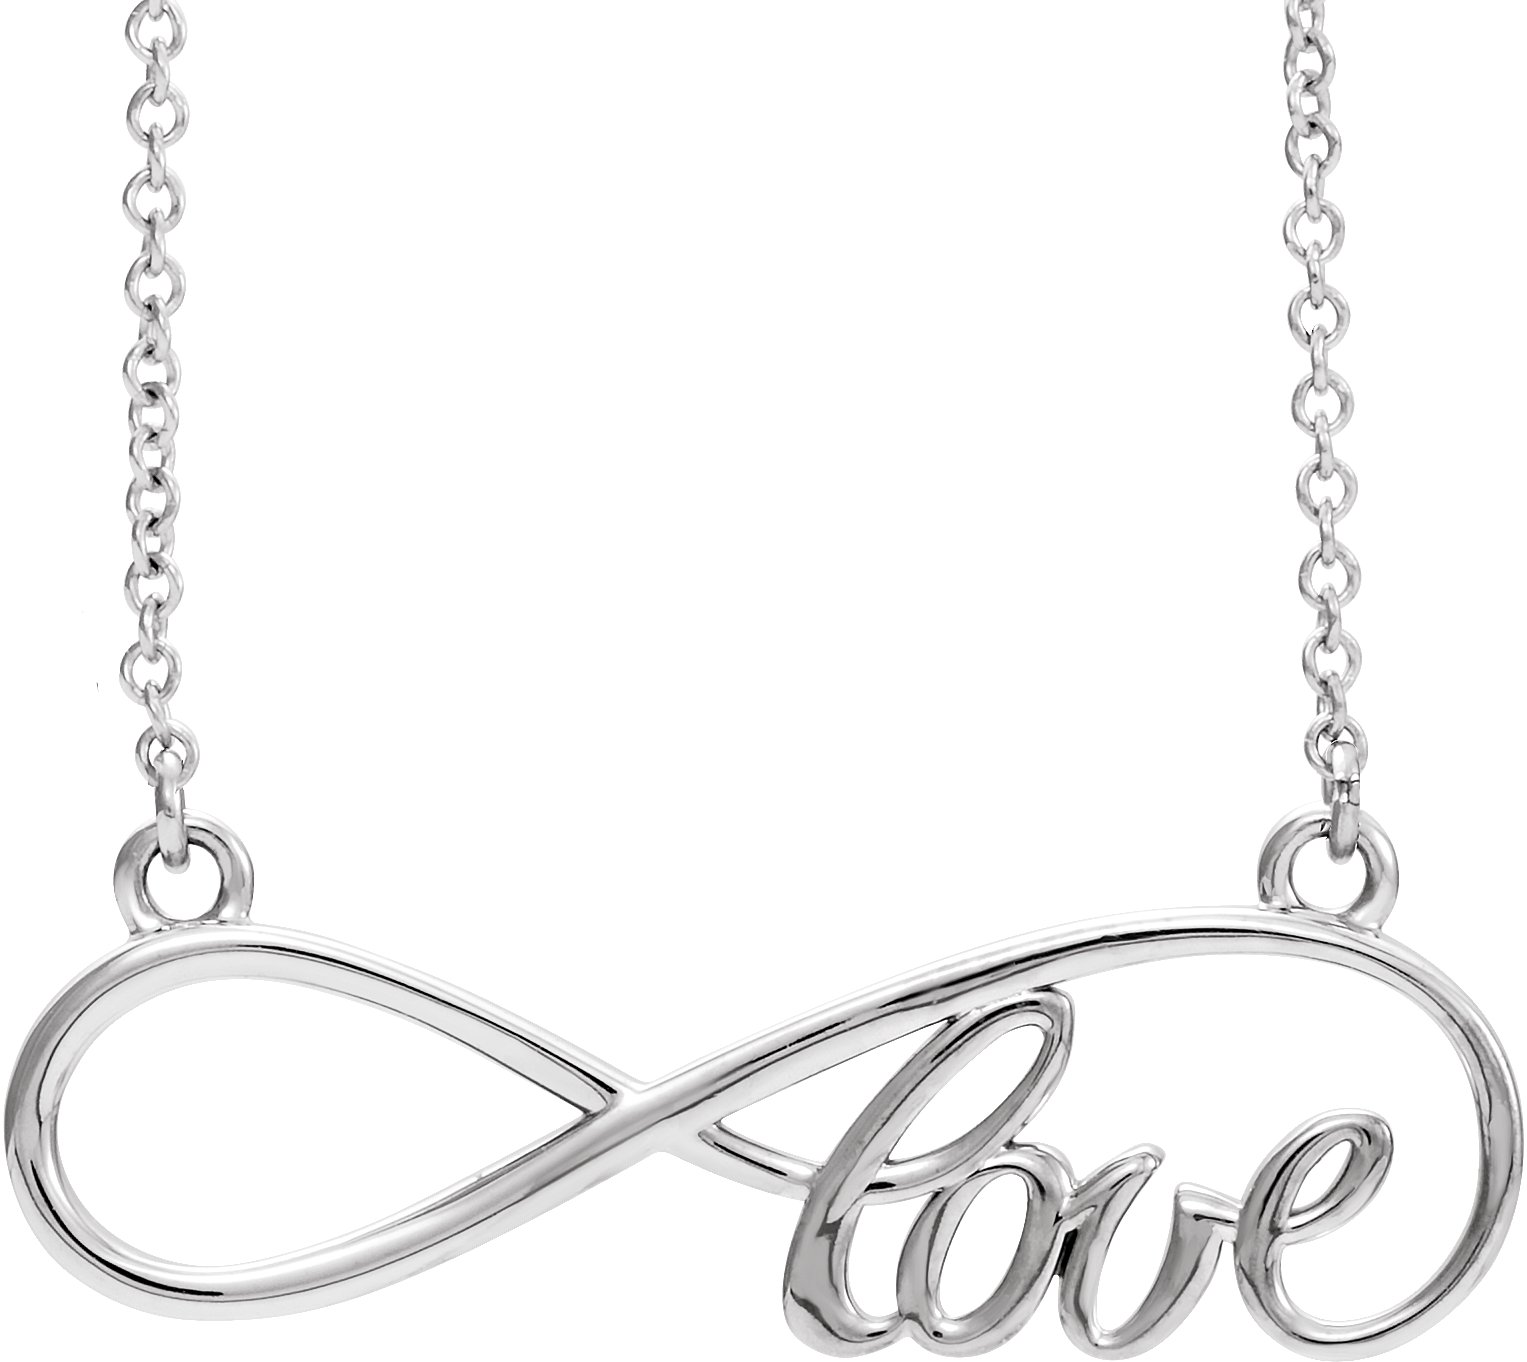 Sterling Silver 27.5x8.4 mm Infinity-Inspired Love 17" Necklace